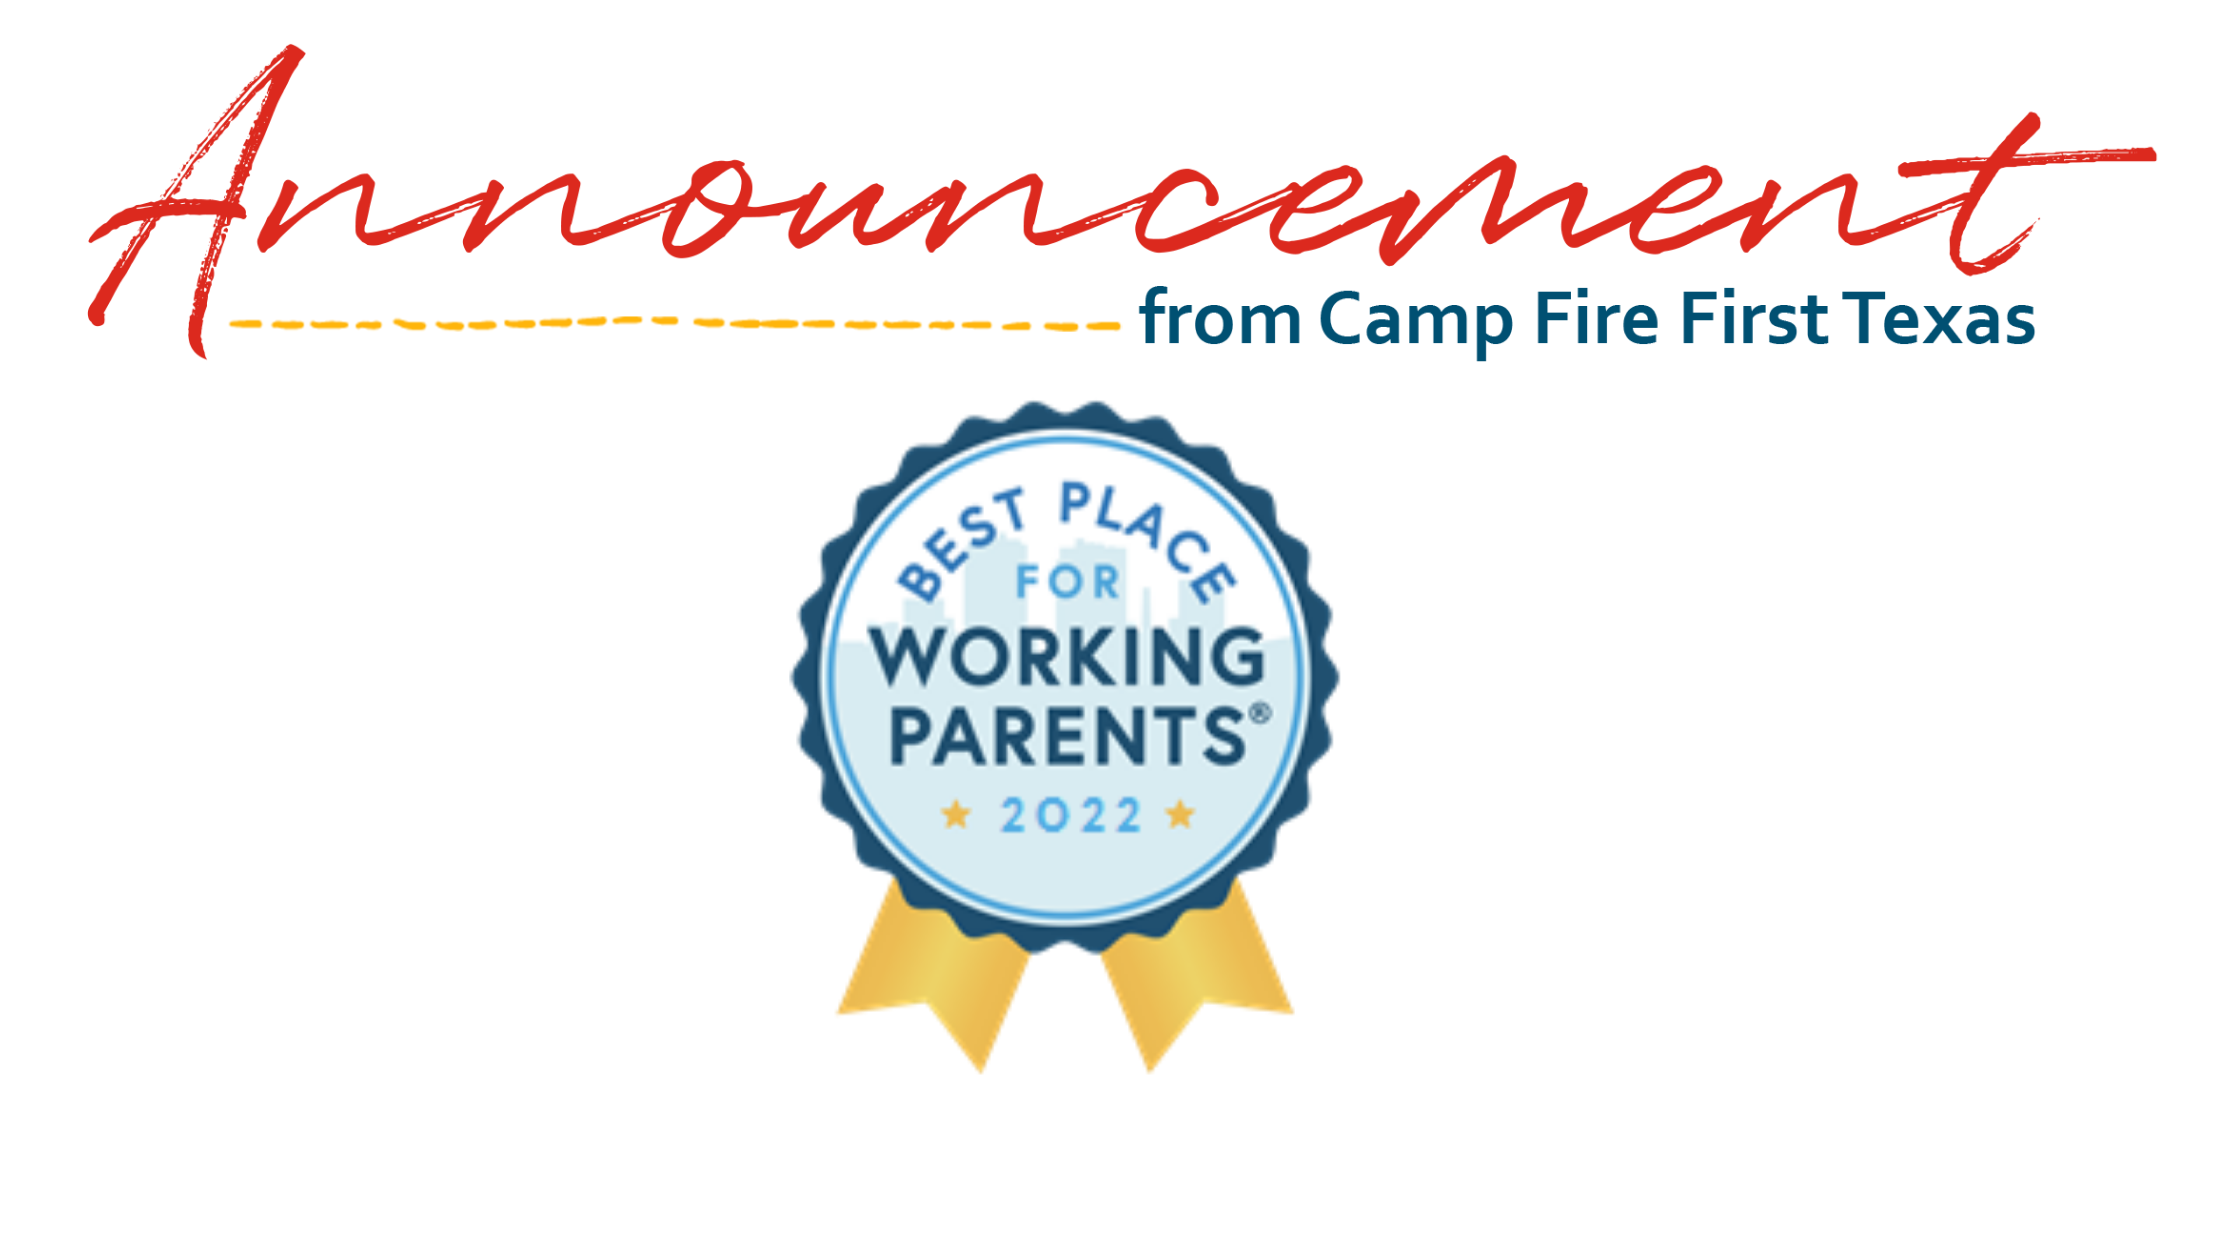 2022 Best Place for Working Parents